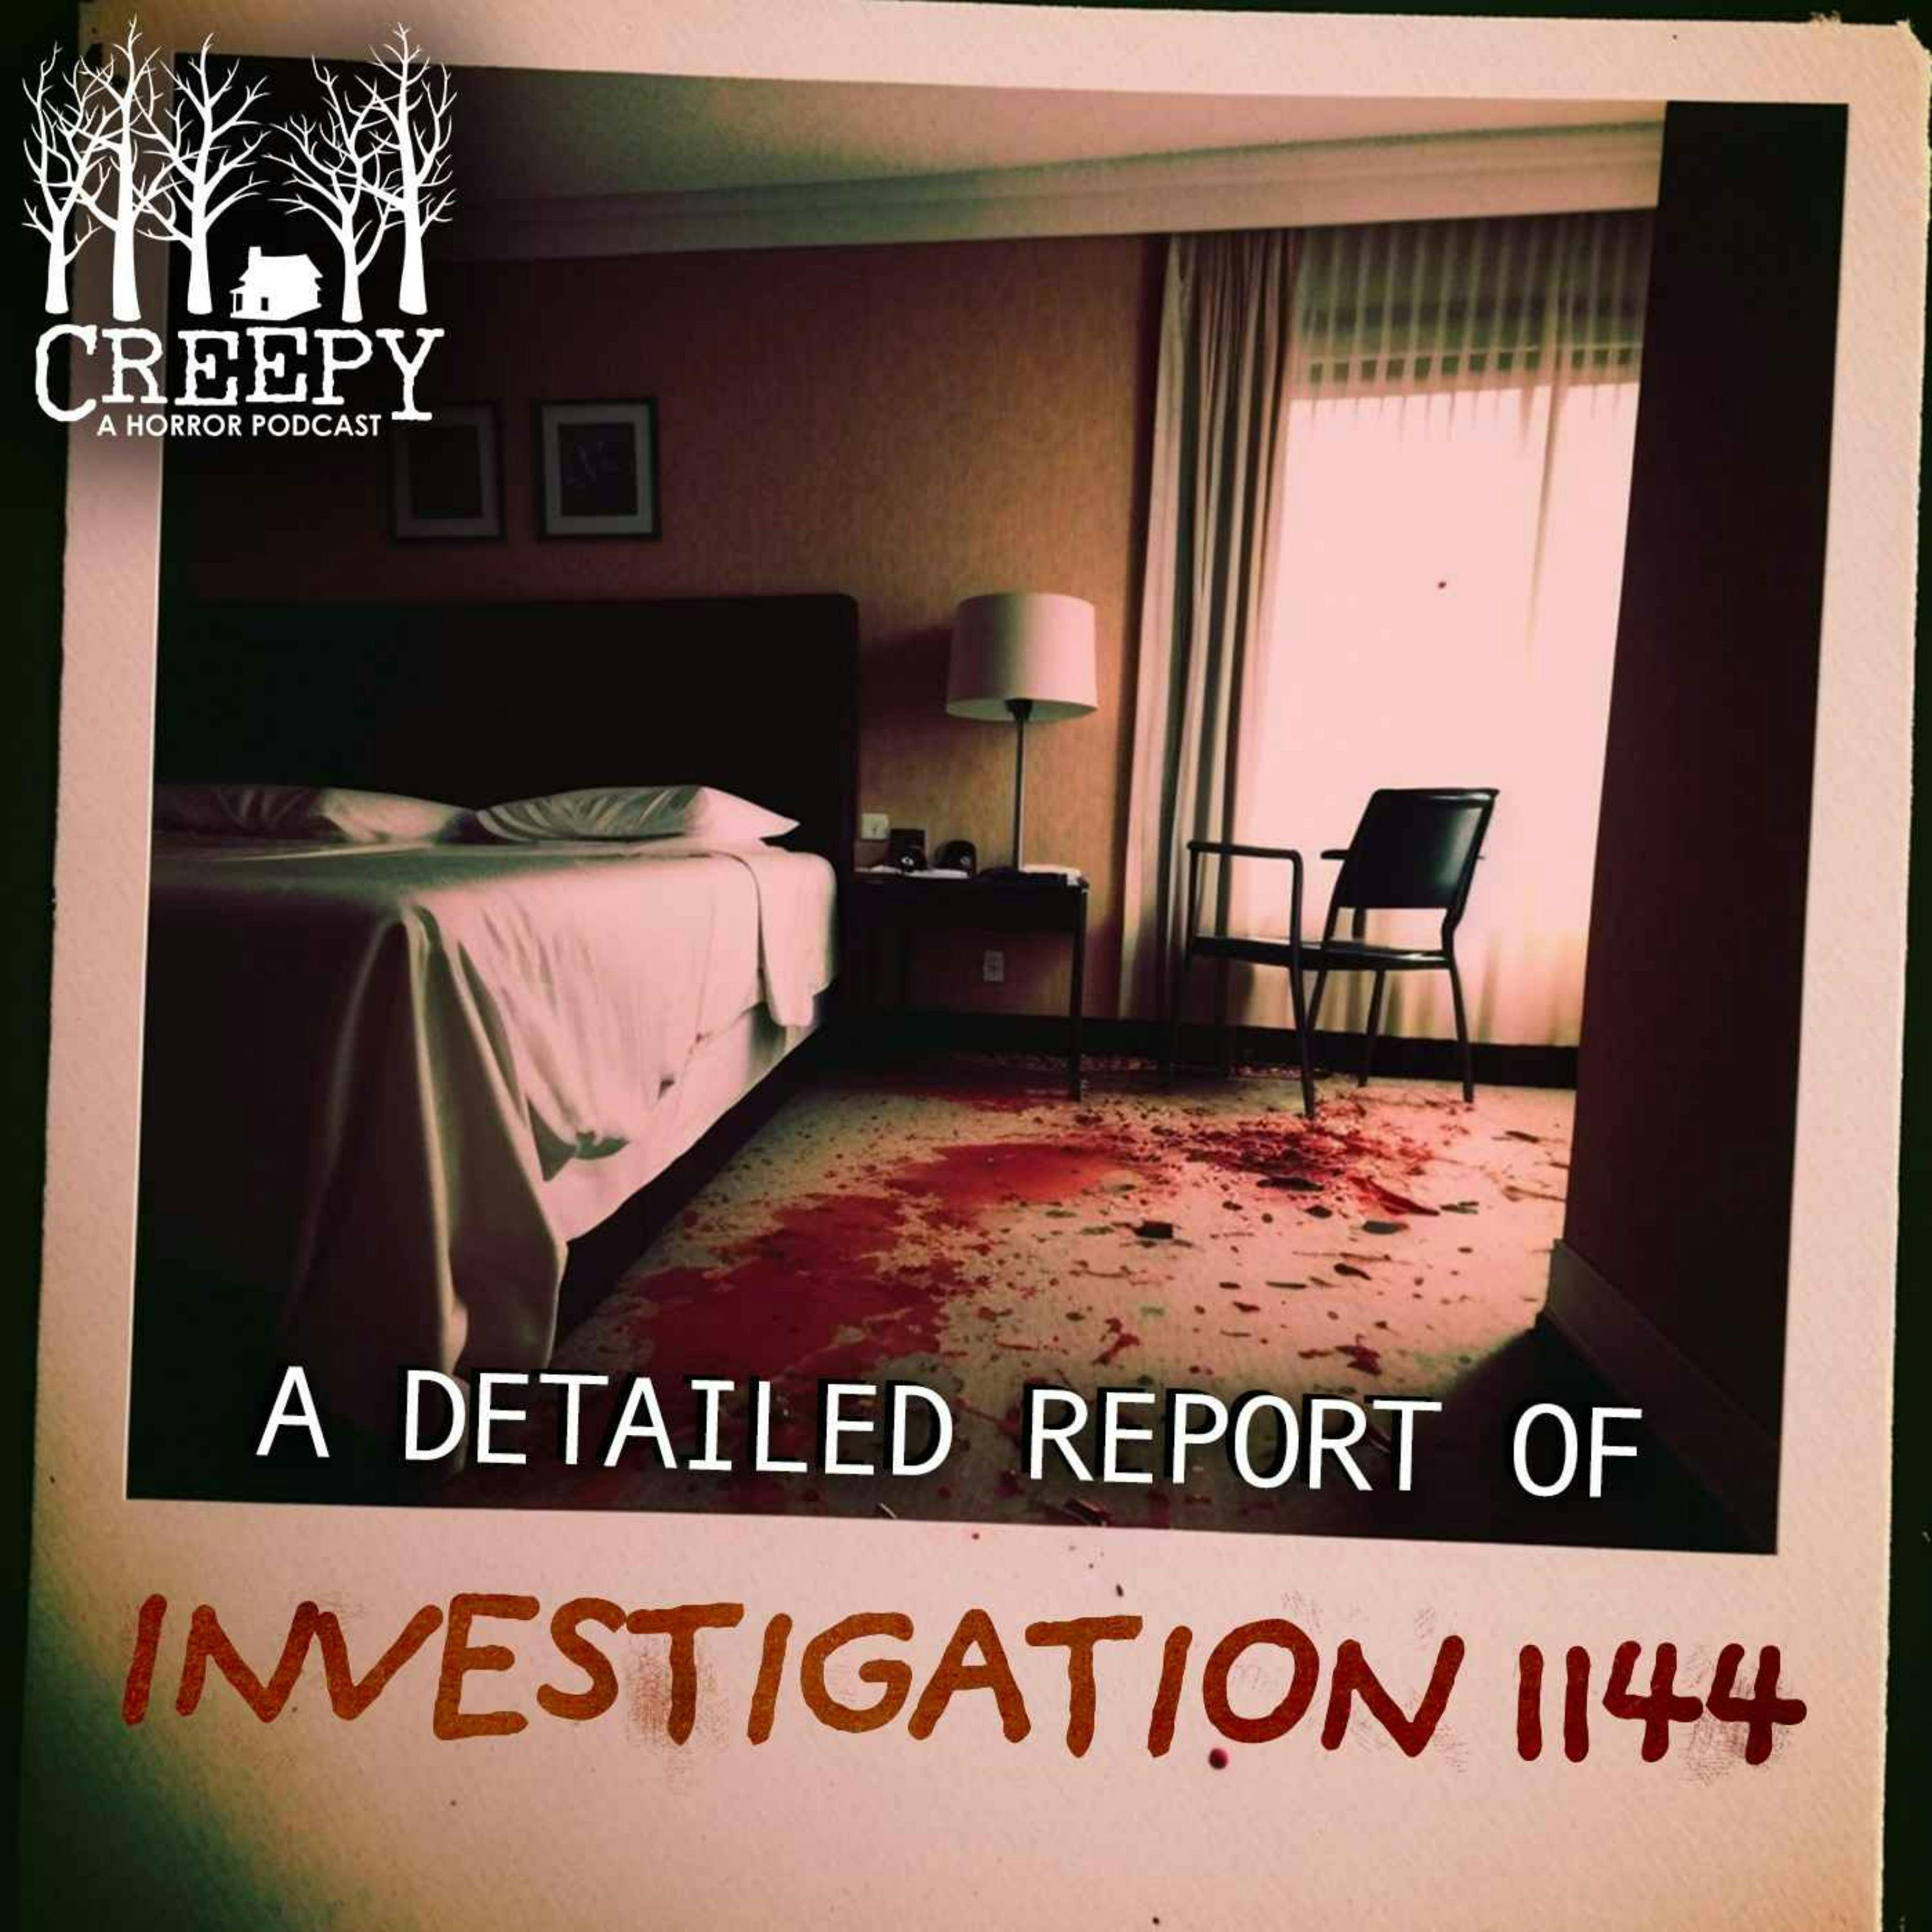 A Detailed Report of Investigation 1144